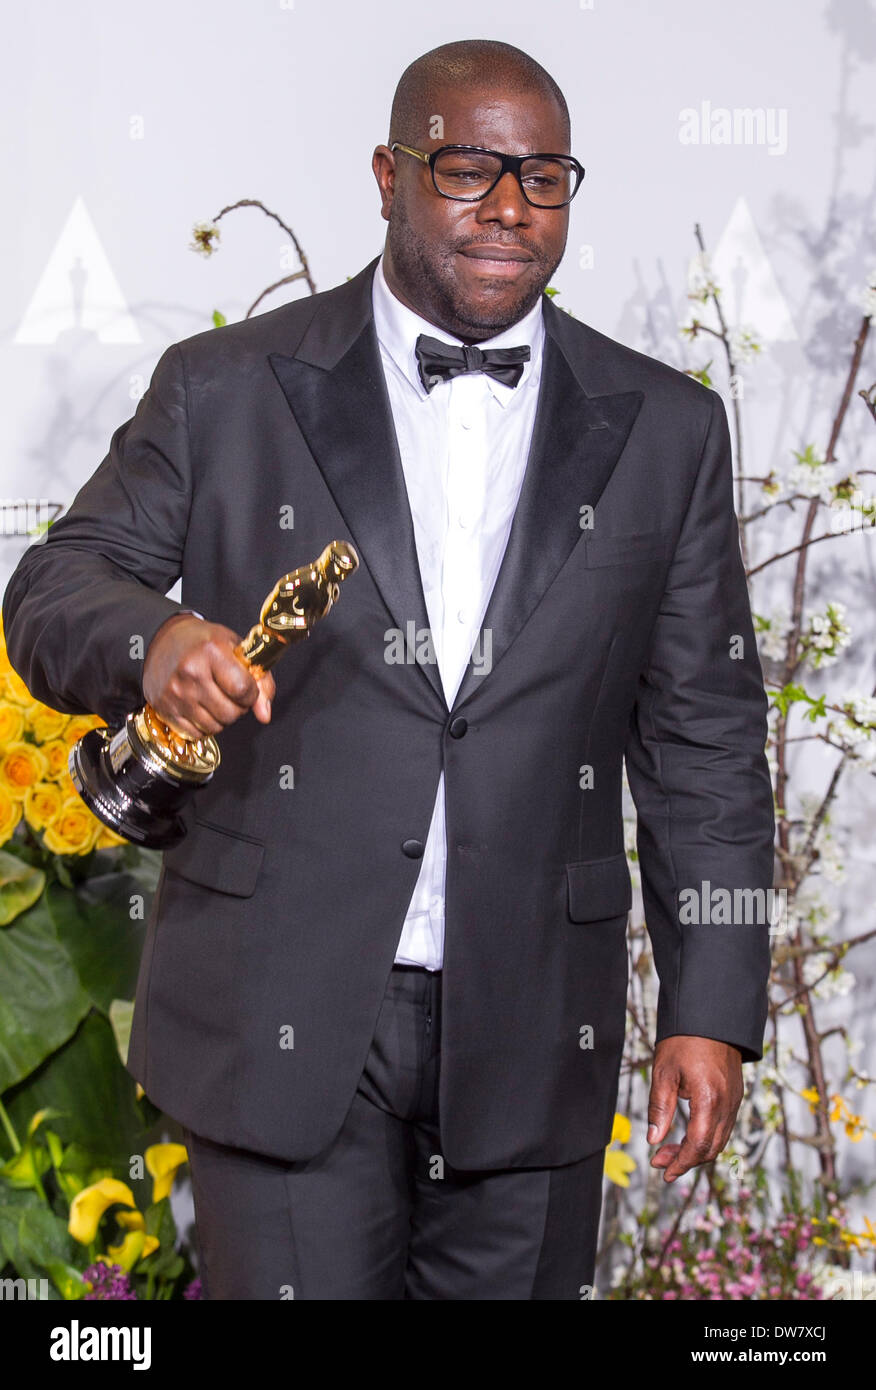 STEVE MCQUEEN 86TH ANNUAL ACADEMY AWARDS PRESSROOM LOS ANGELES  USA 02 March 2014 Stock Photo